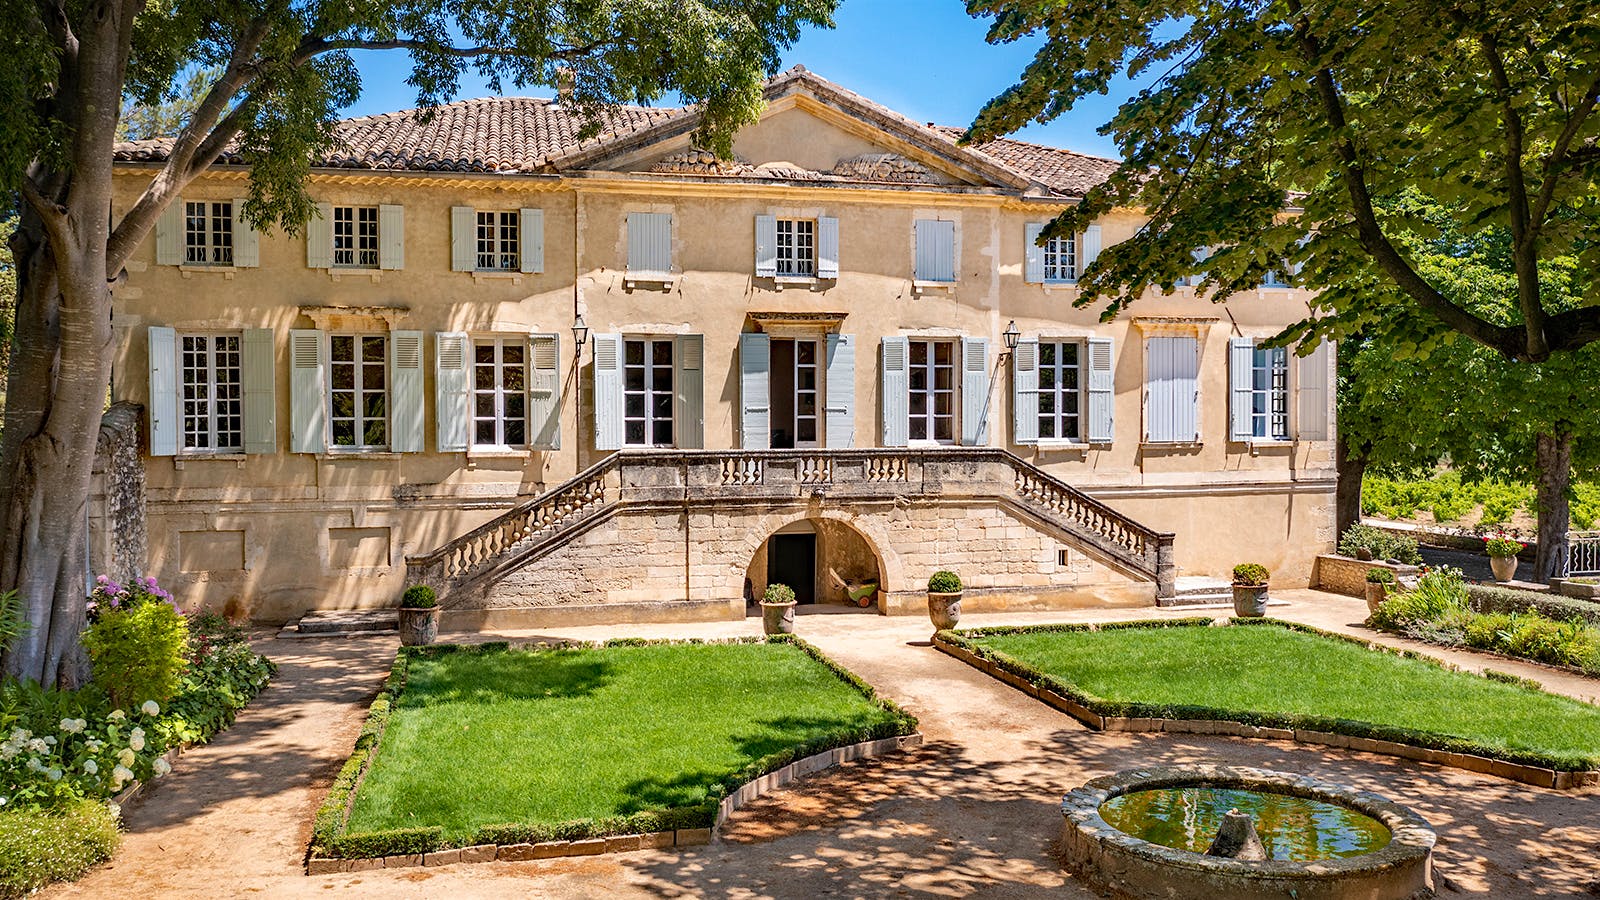 Exclusive: Northern Rhône's E. Guigal Expands in the South, Buying Tavel's Château d'Aquéria